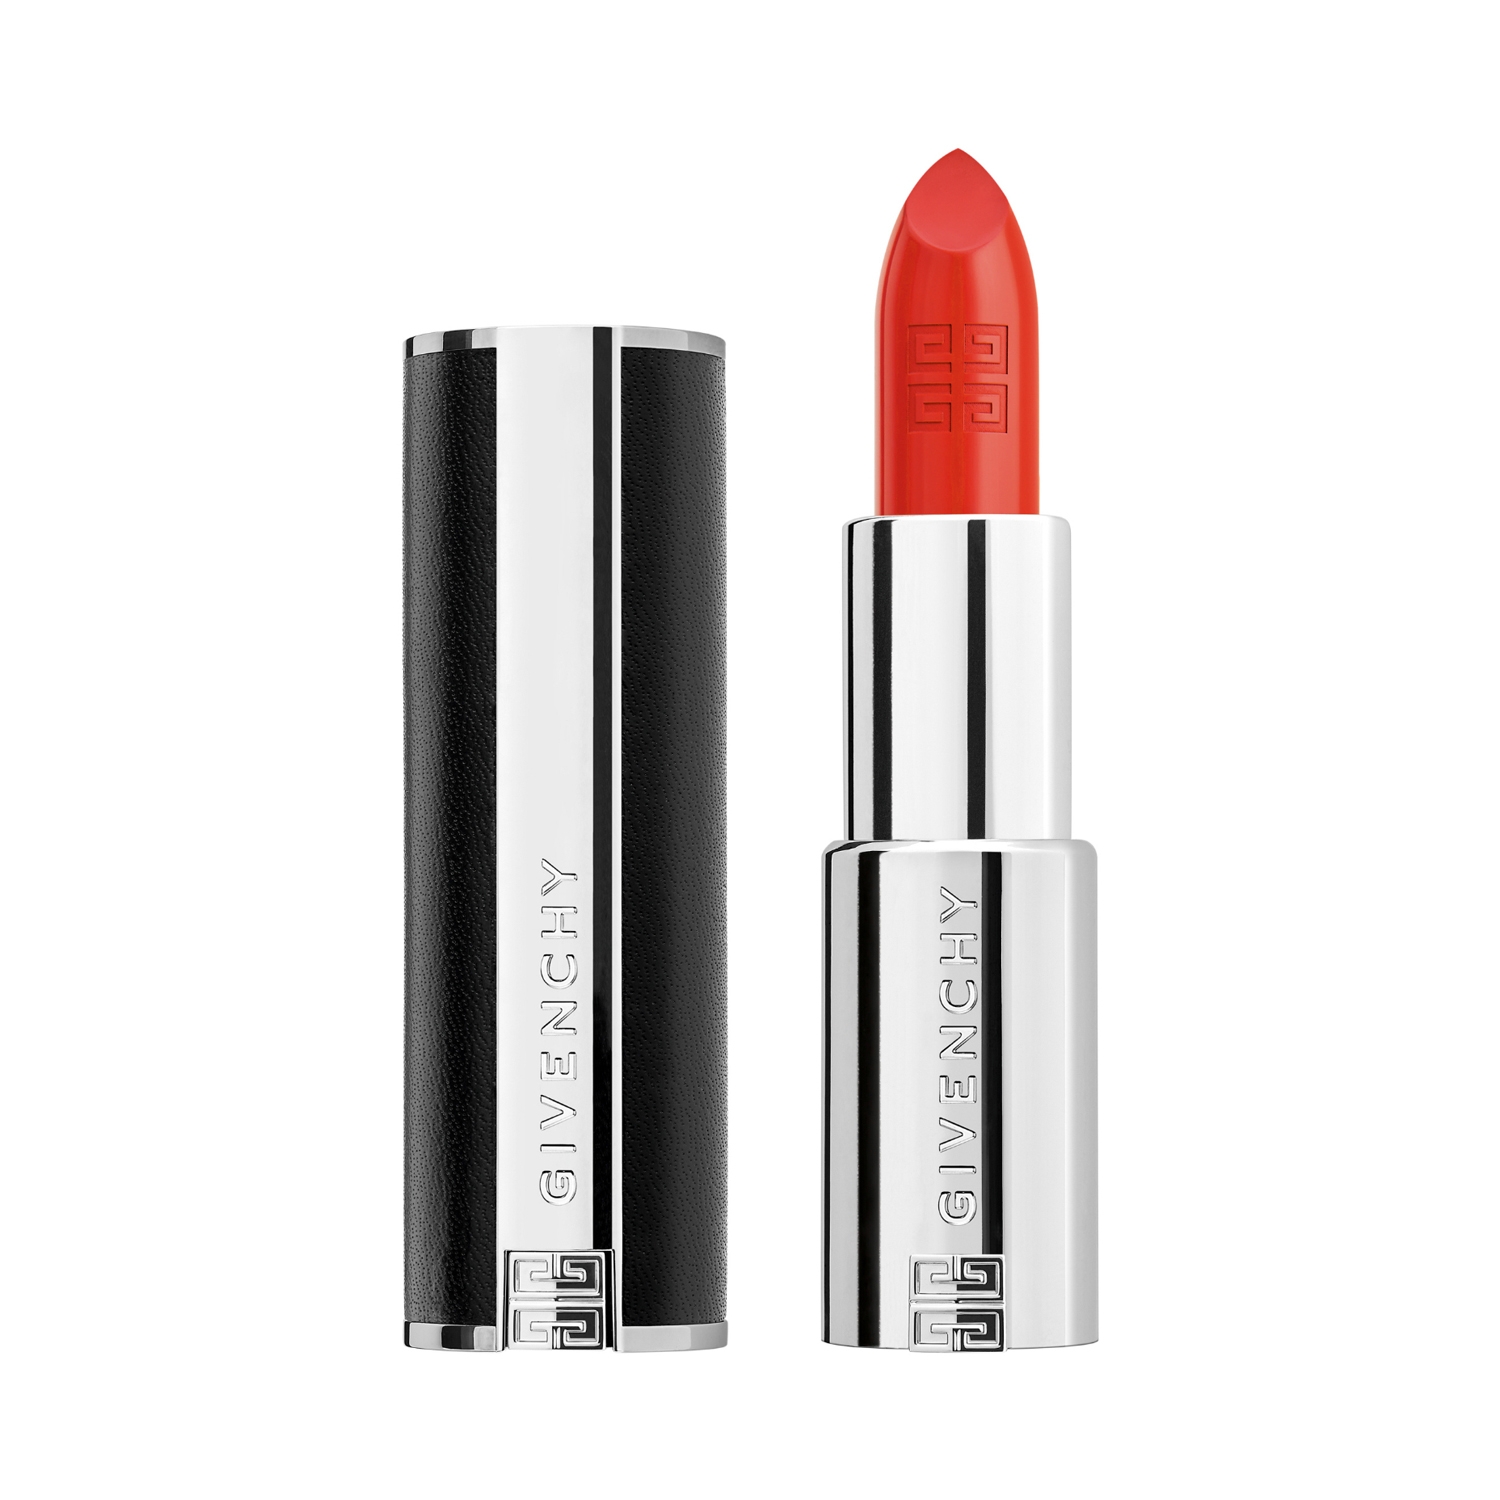 Givenchy | Givenchy Le Rouge Interdit Intense Silk Lipstick - N 301 Orange Impertinent (3.4g)